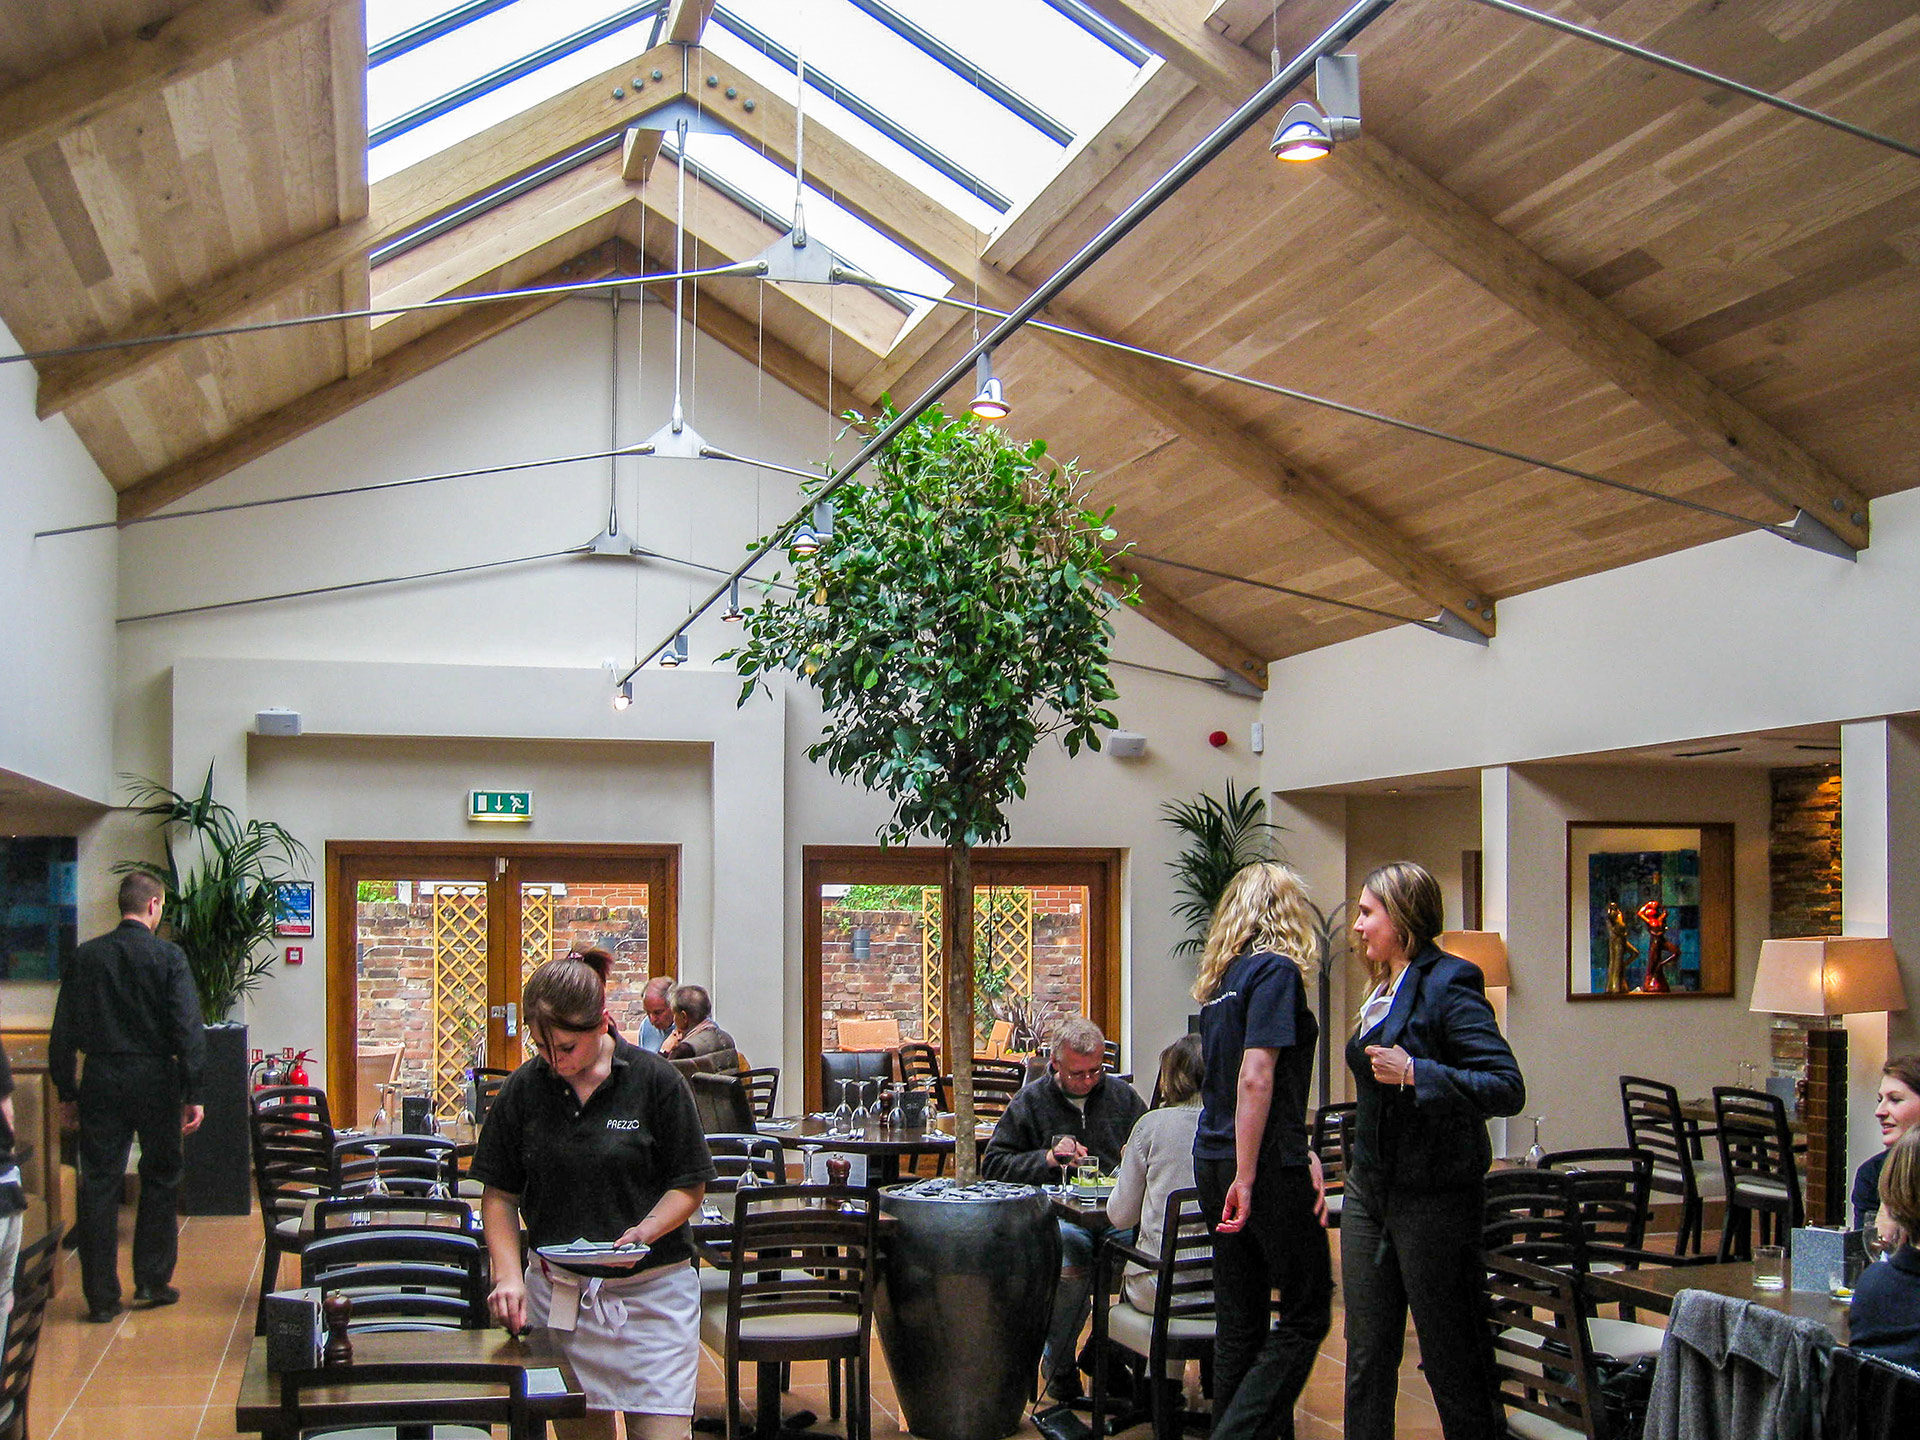 interior of restaurant with large dining area and vaulted ceilings